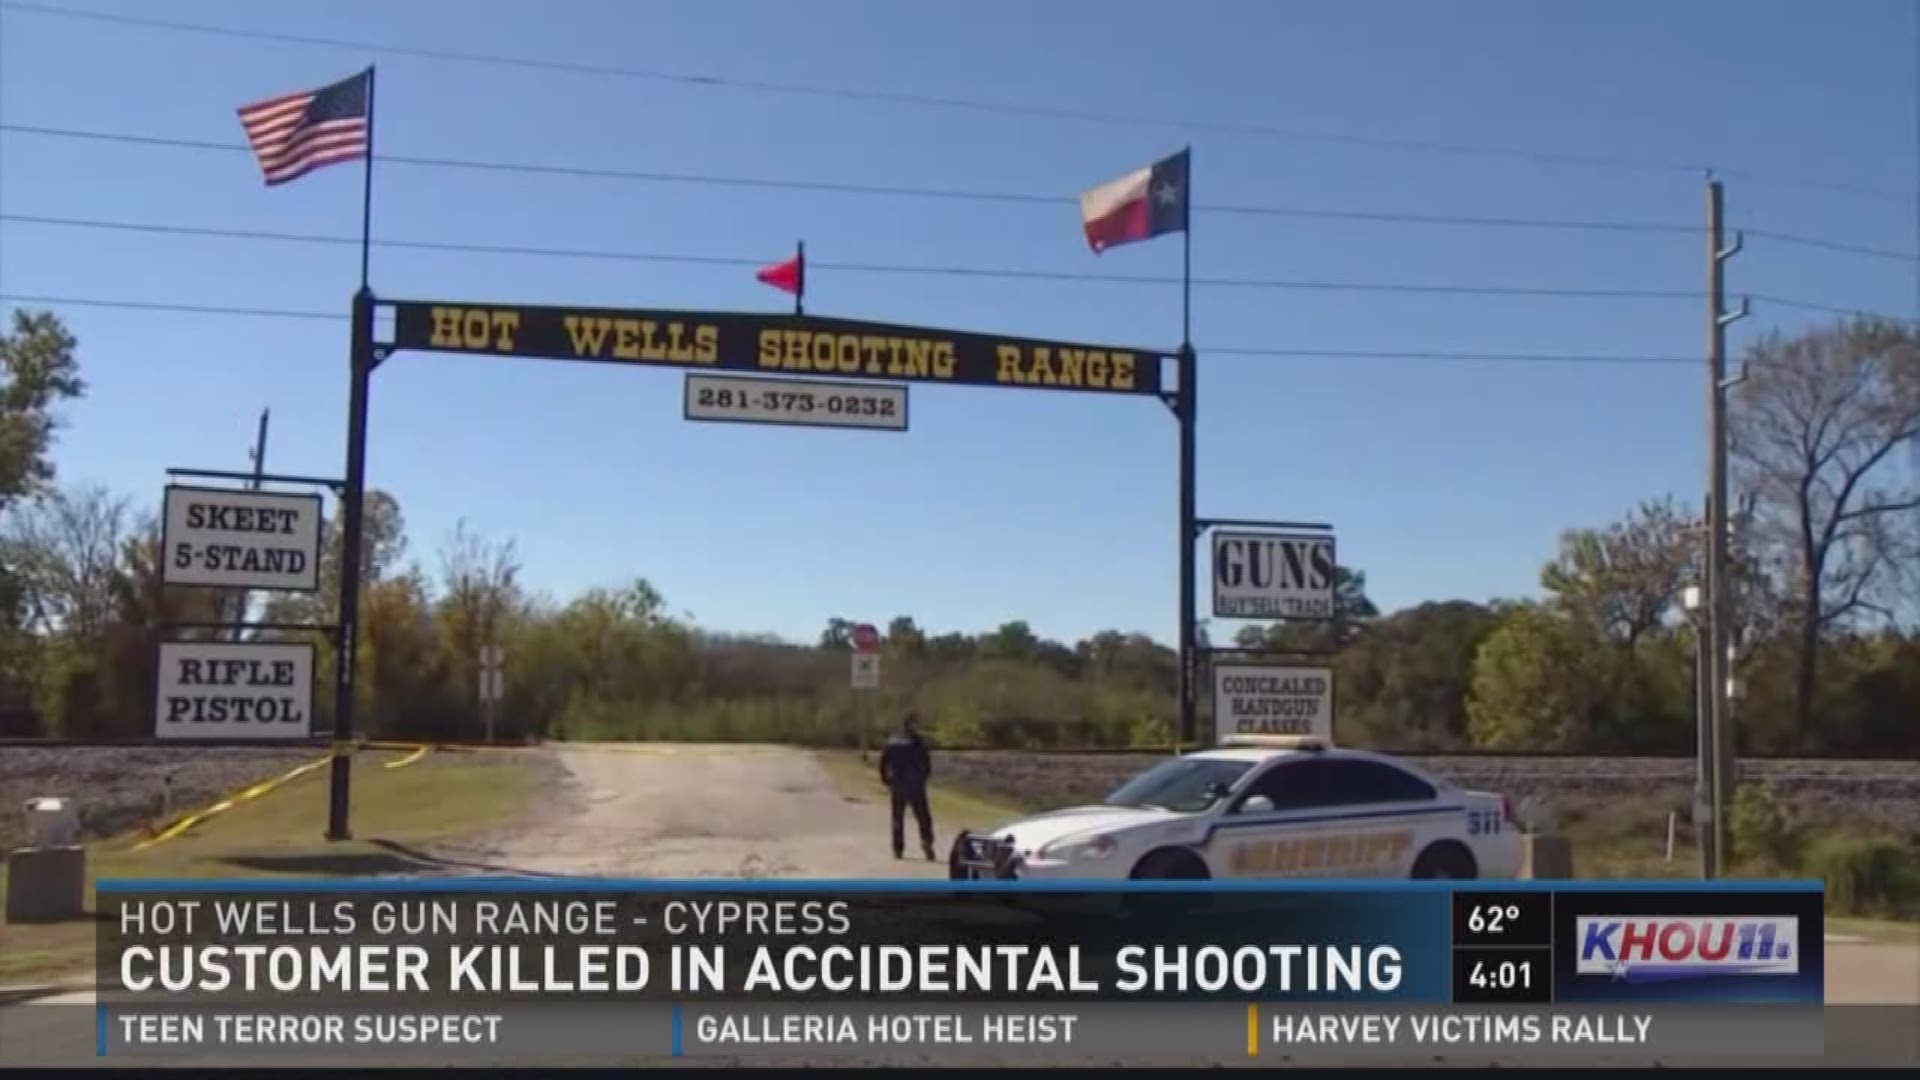 A customer at a gun range in Cypress was killed in an accidental shooting.